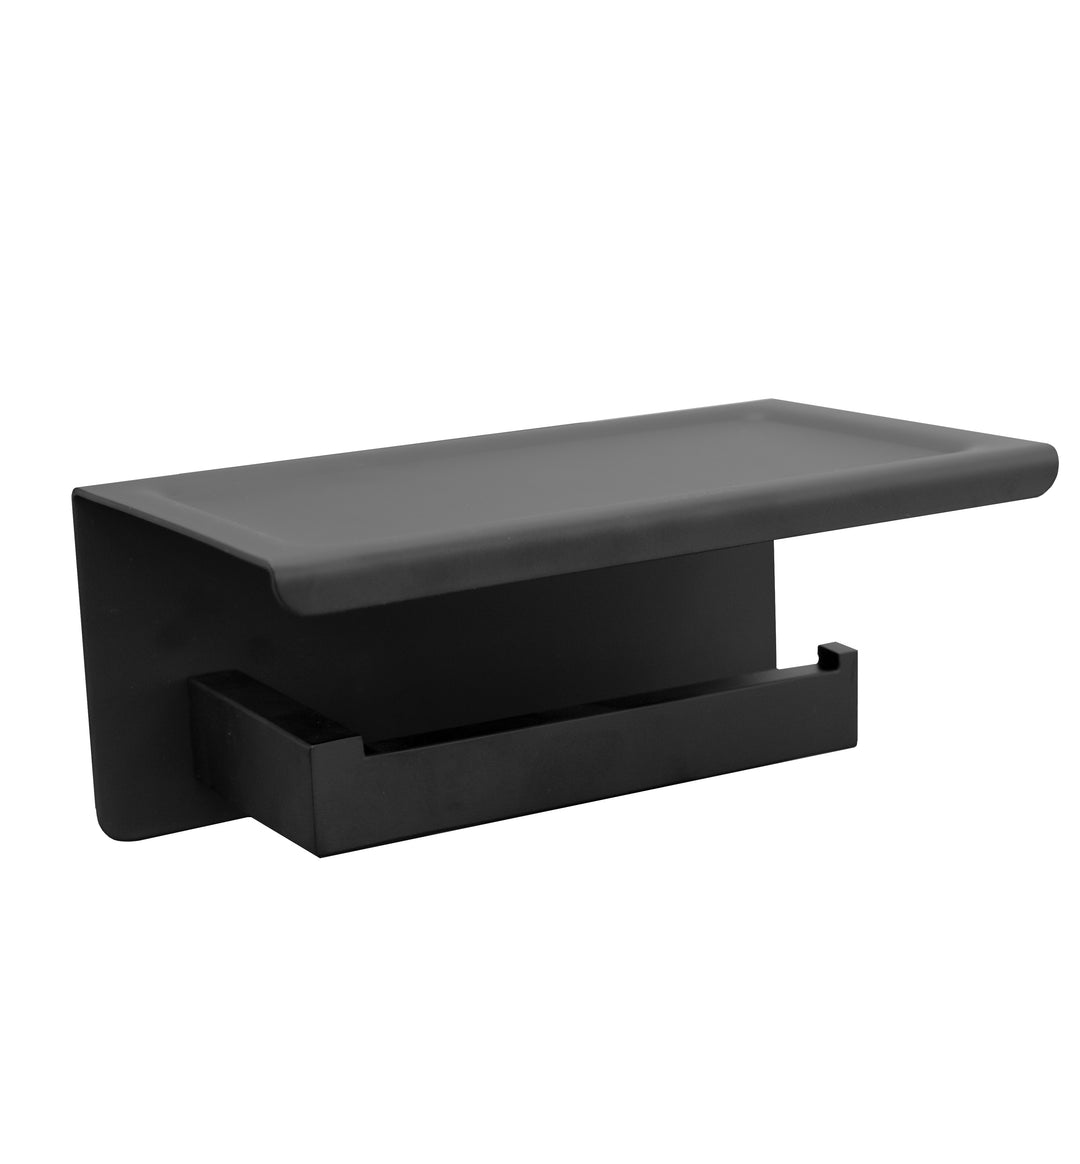 Paper Holder With Phone Shelf Black IS3106B